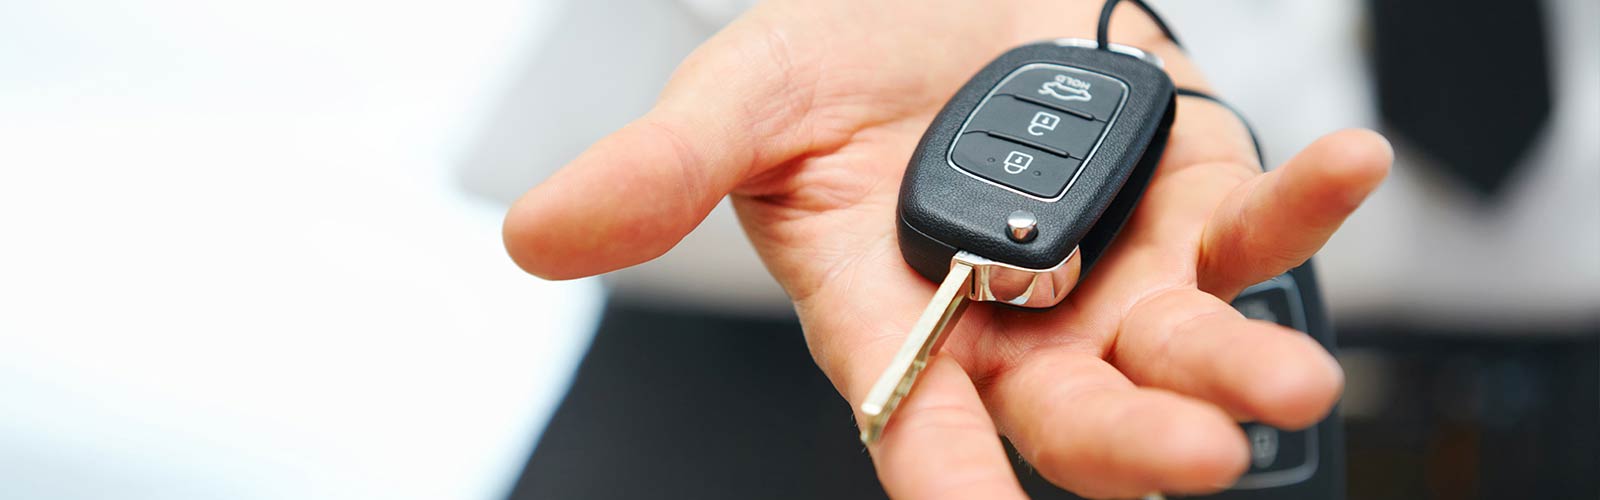 Person holding the keys to a new car in the palm of their hand.